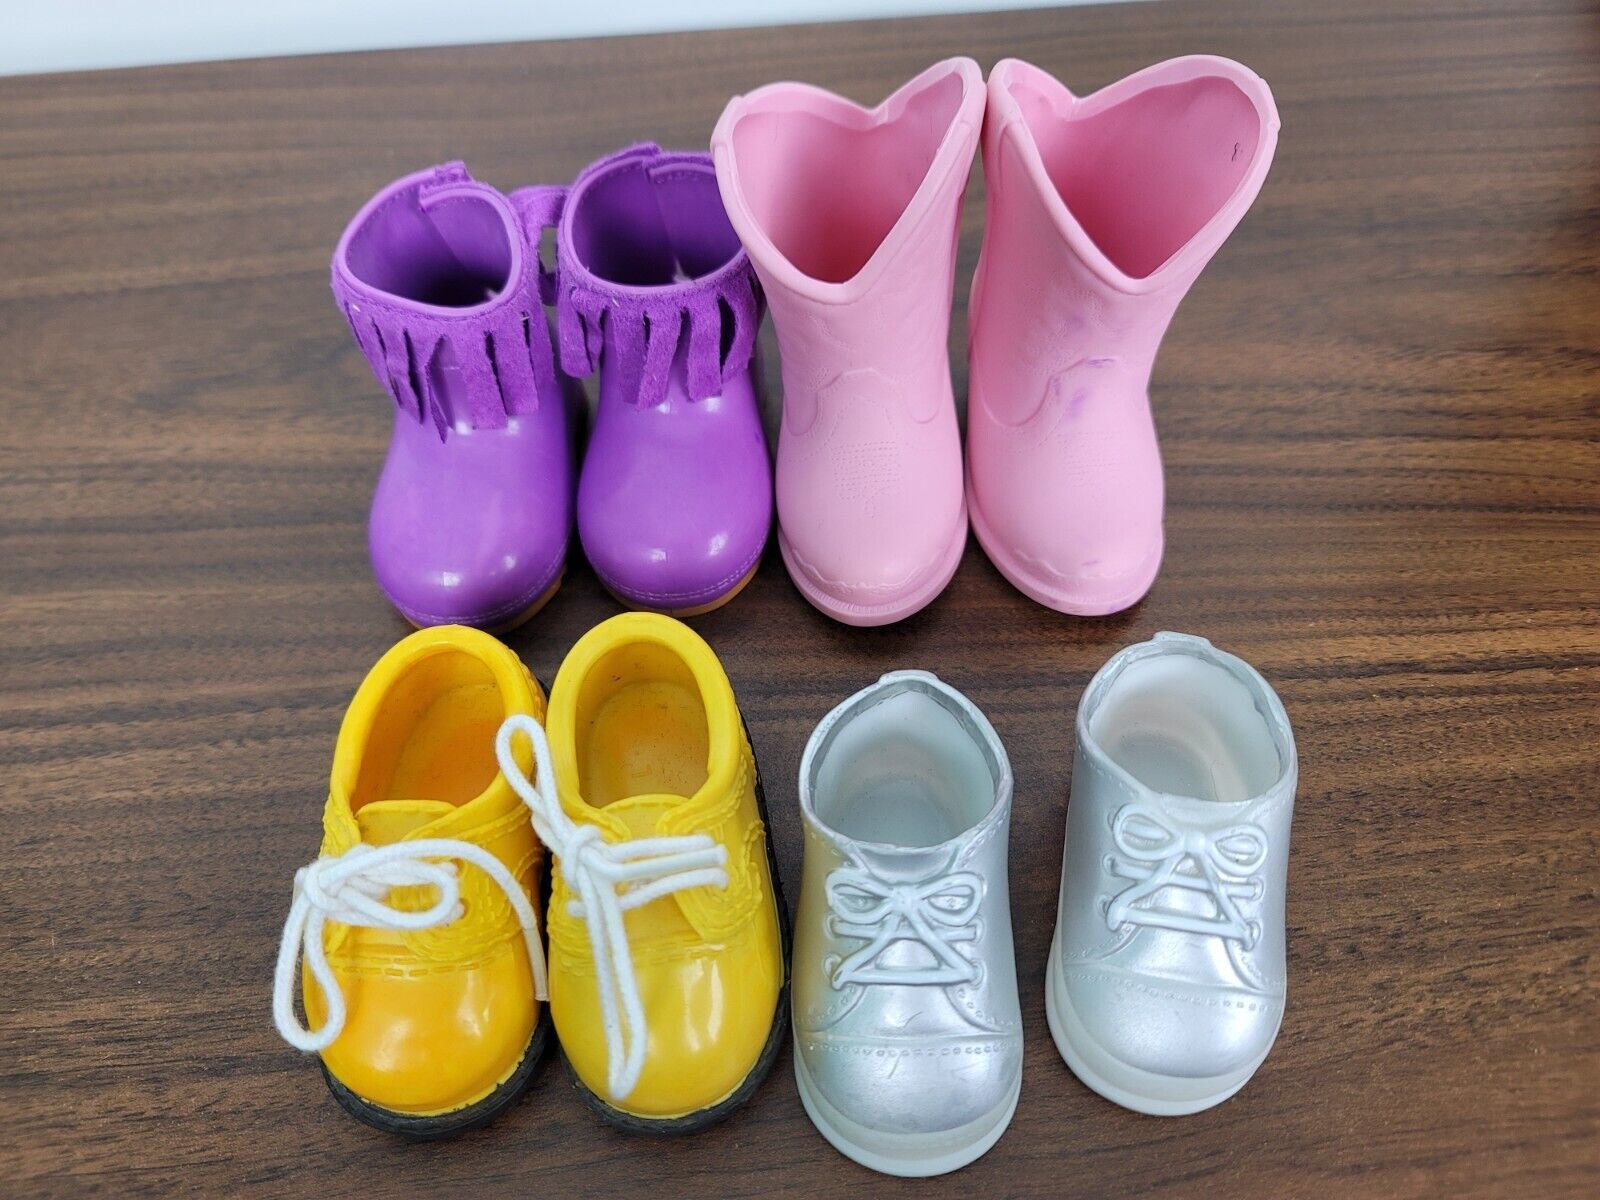 Doll Shoes Boots Set 6 Pr Accessories Footwear Fits American Girl & 18” Dolls - $10.52